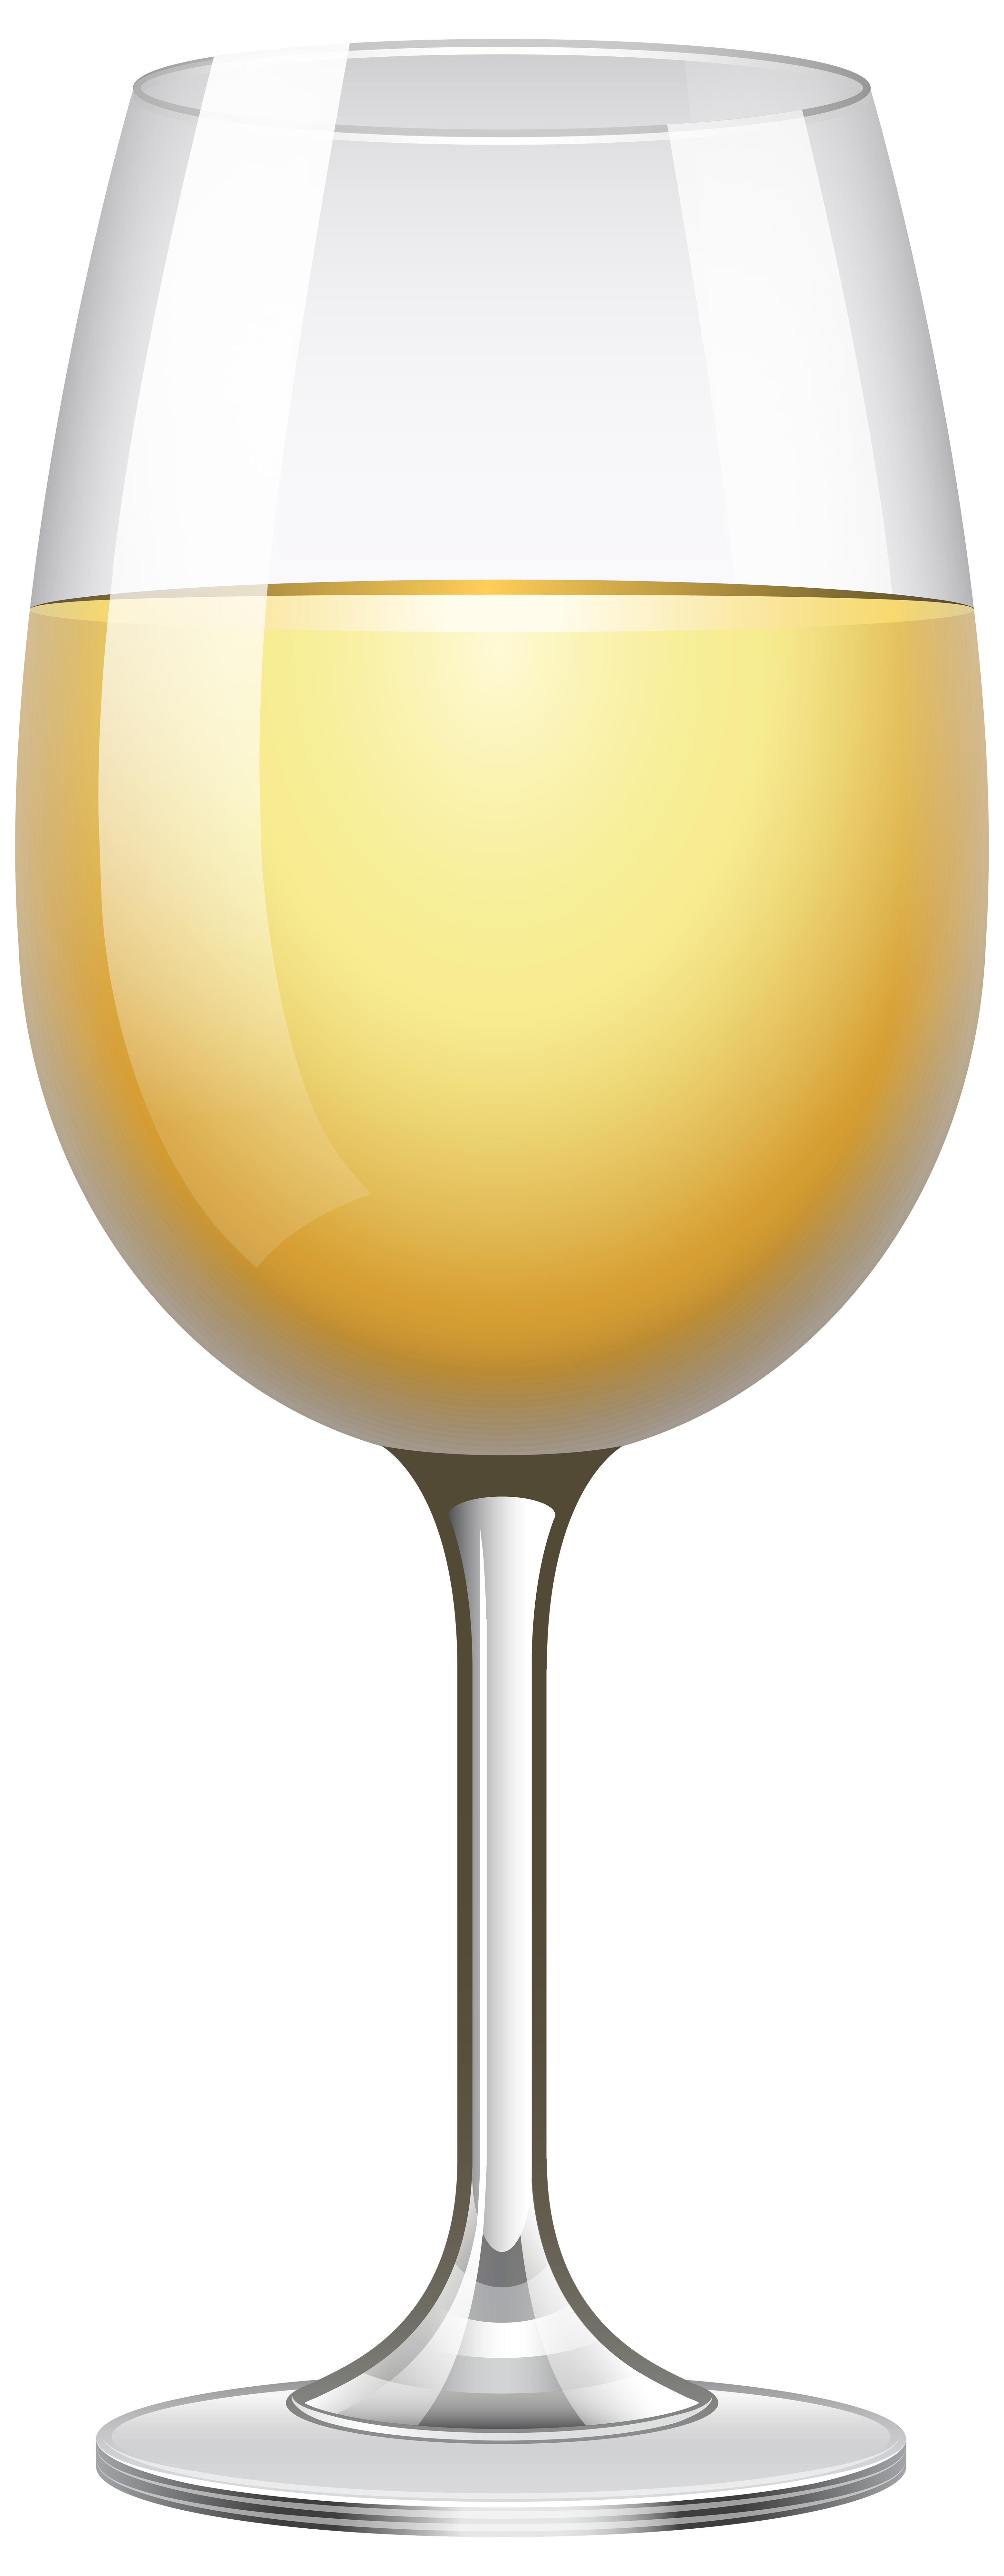 Free Transparent Wine Cliparts, Download Free Transparent Wine Cliparts